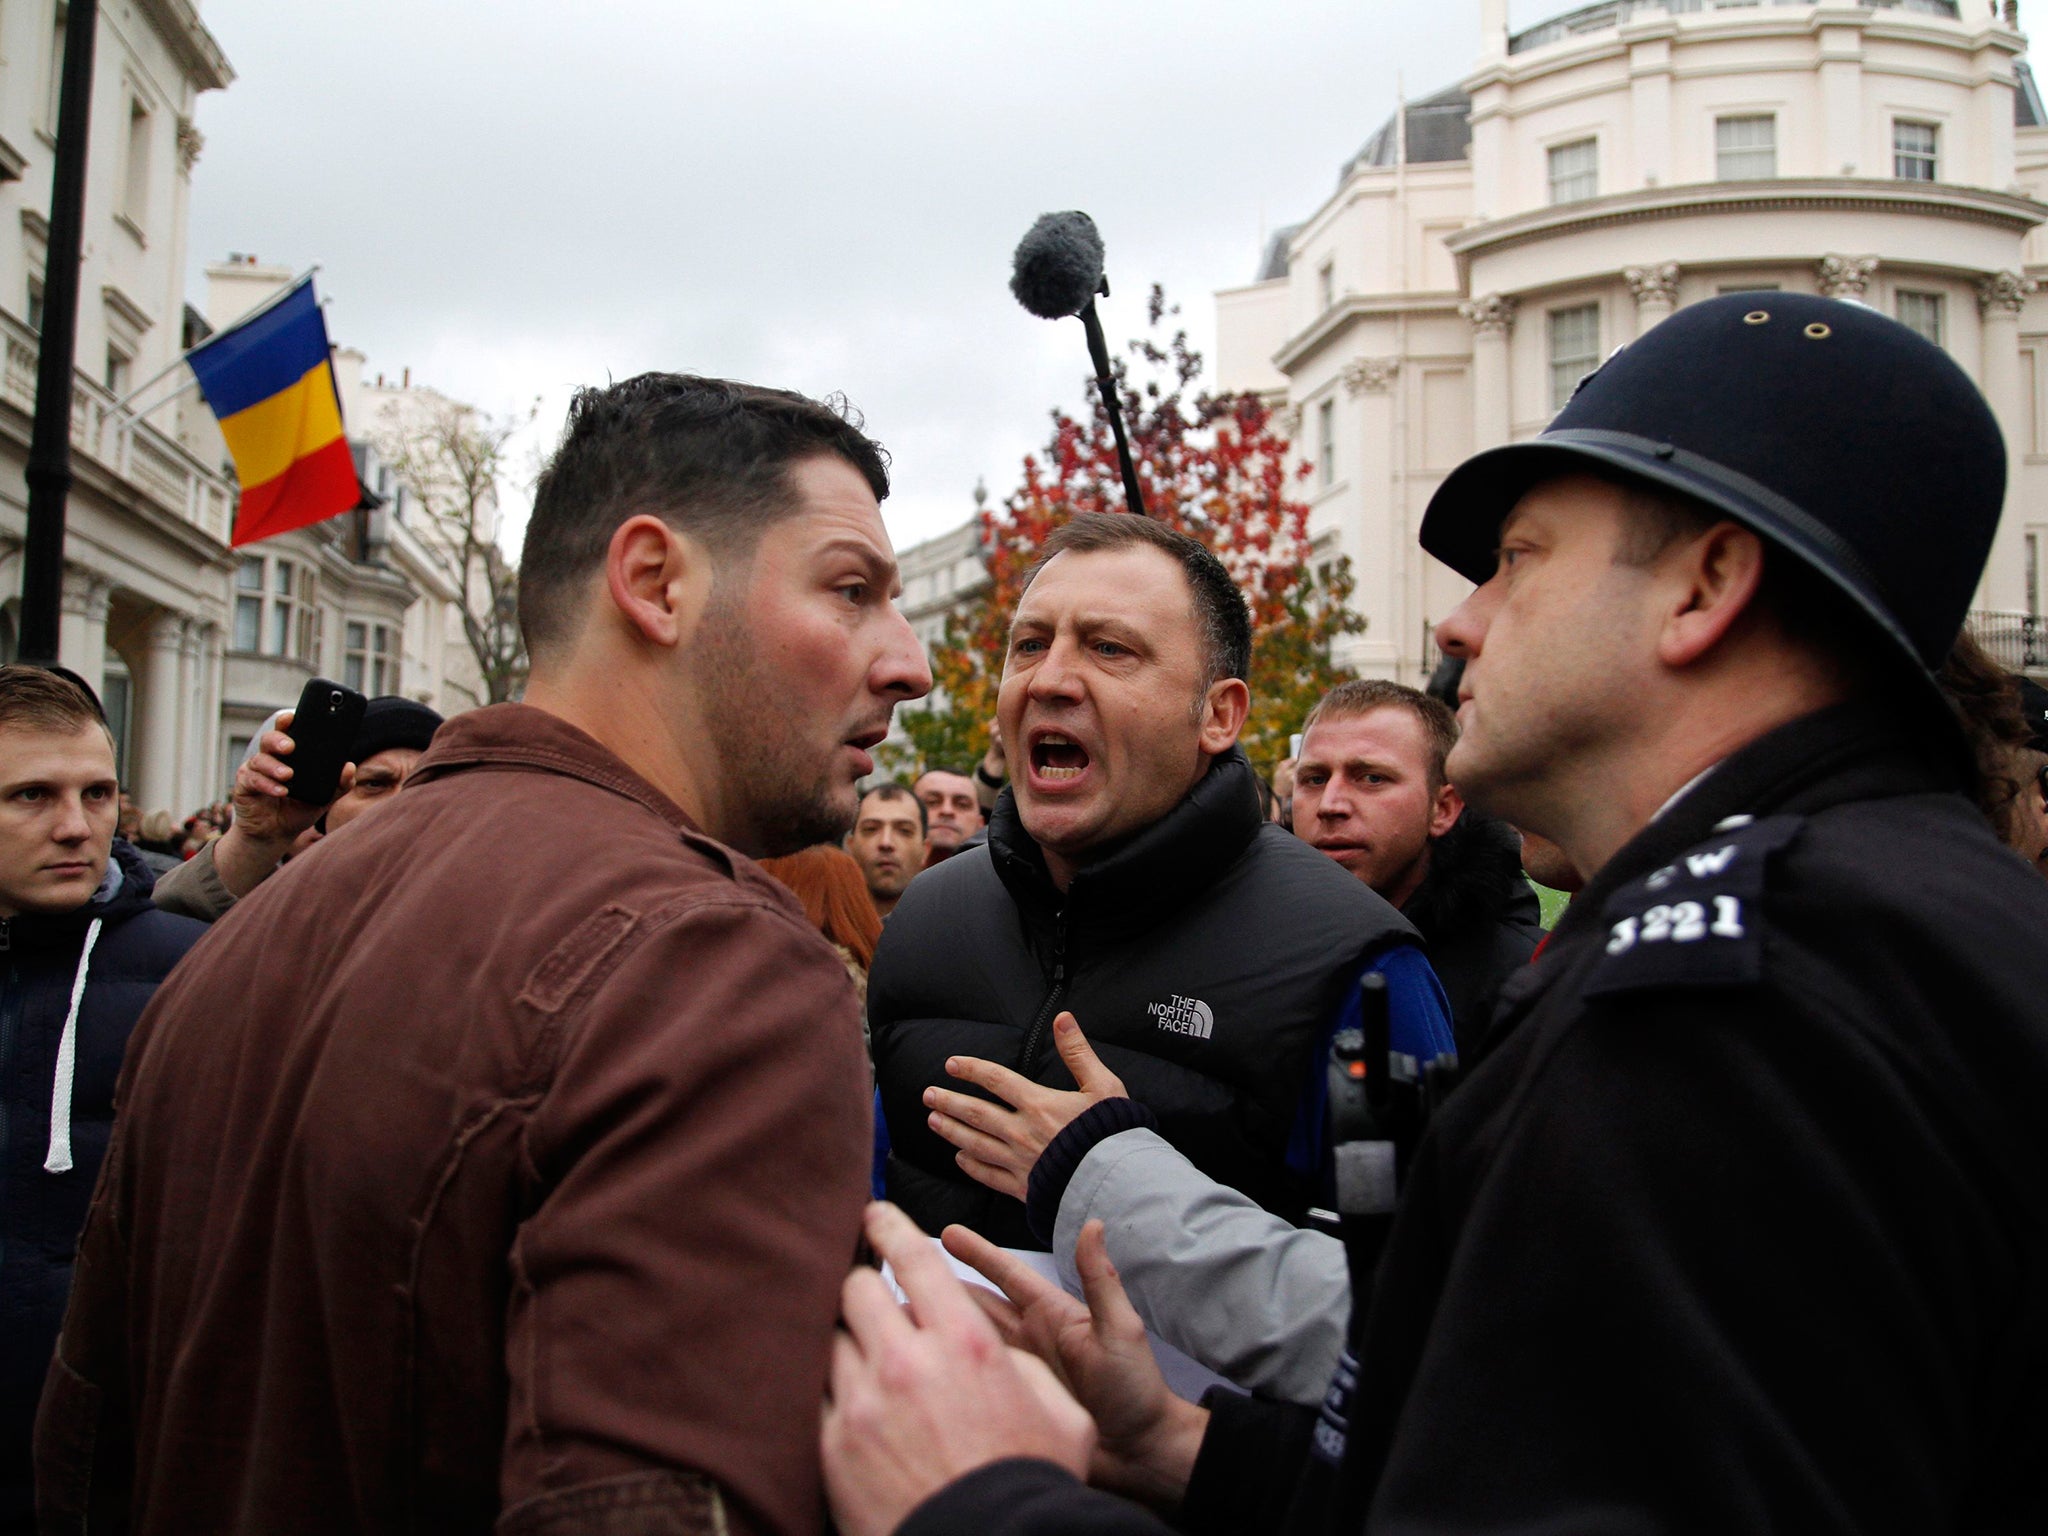 A policeman intervenes between two Romanians arguing as they wait in line to enter a polling station at the Romanian embassy in London